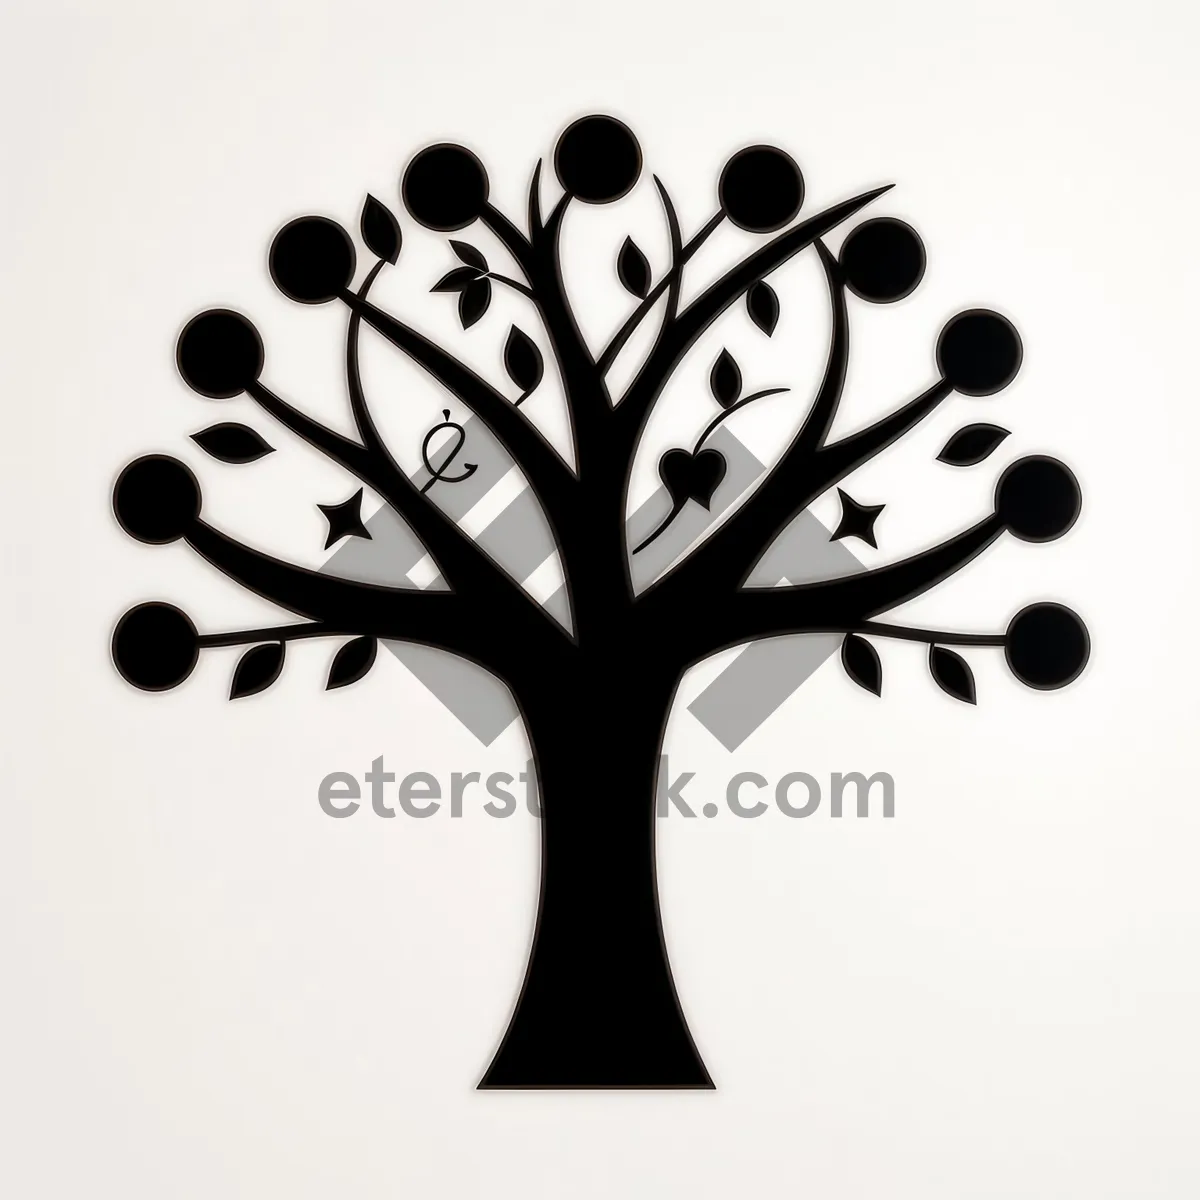 Picture of Floral Tree Branch Design Drawing - Black Silhouette